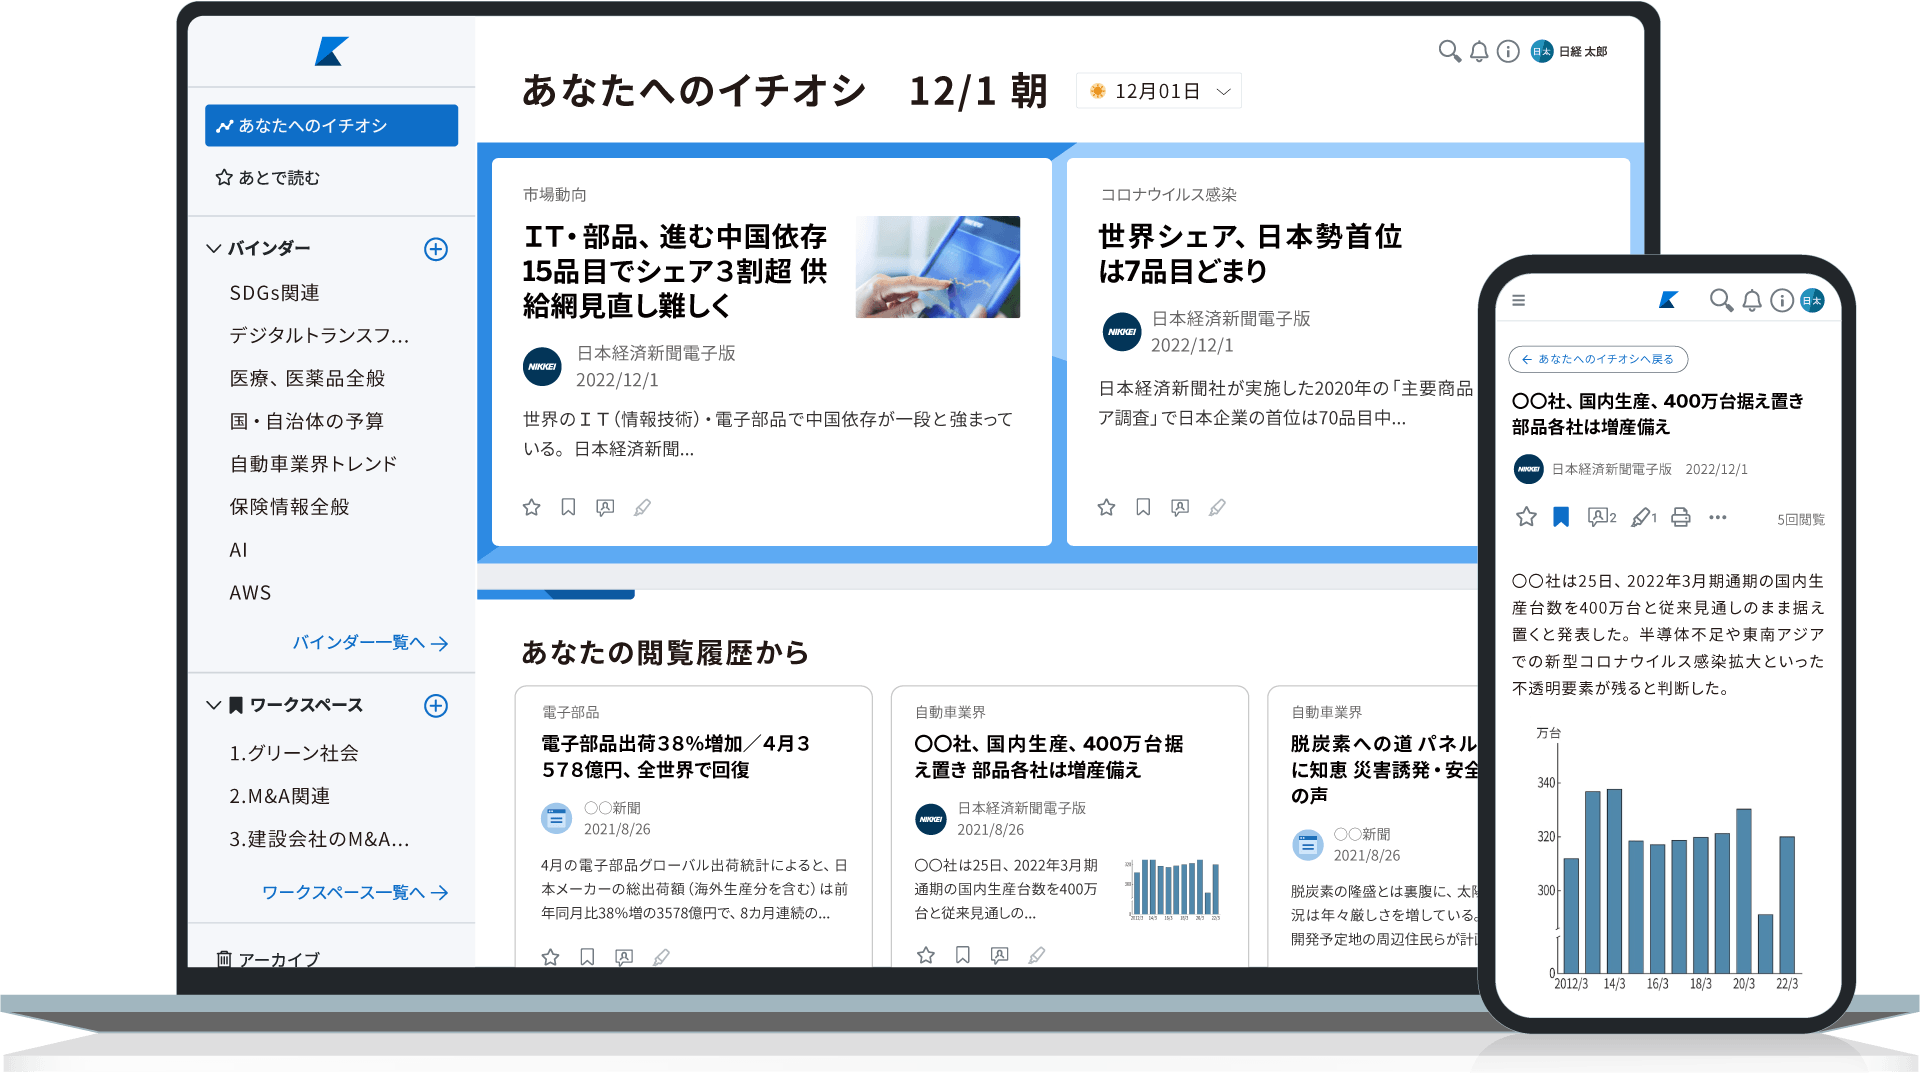 NIKKEI The KNOWLEDGE